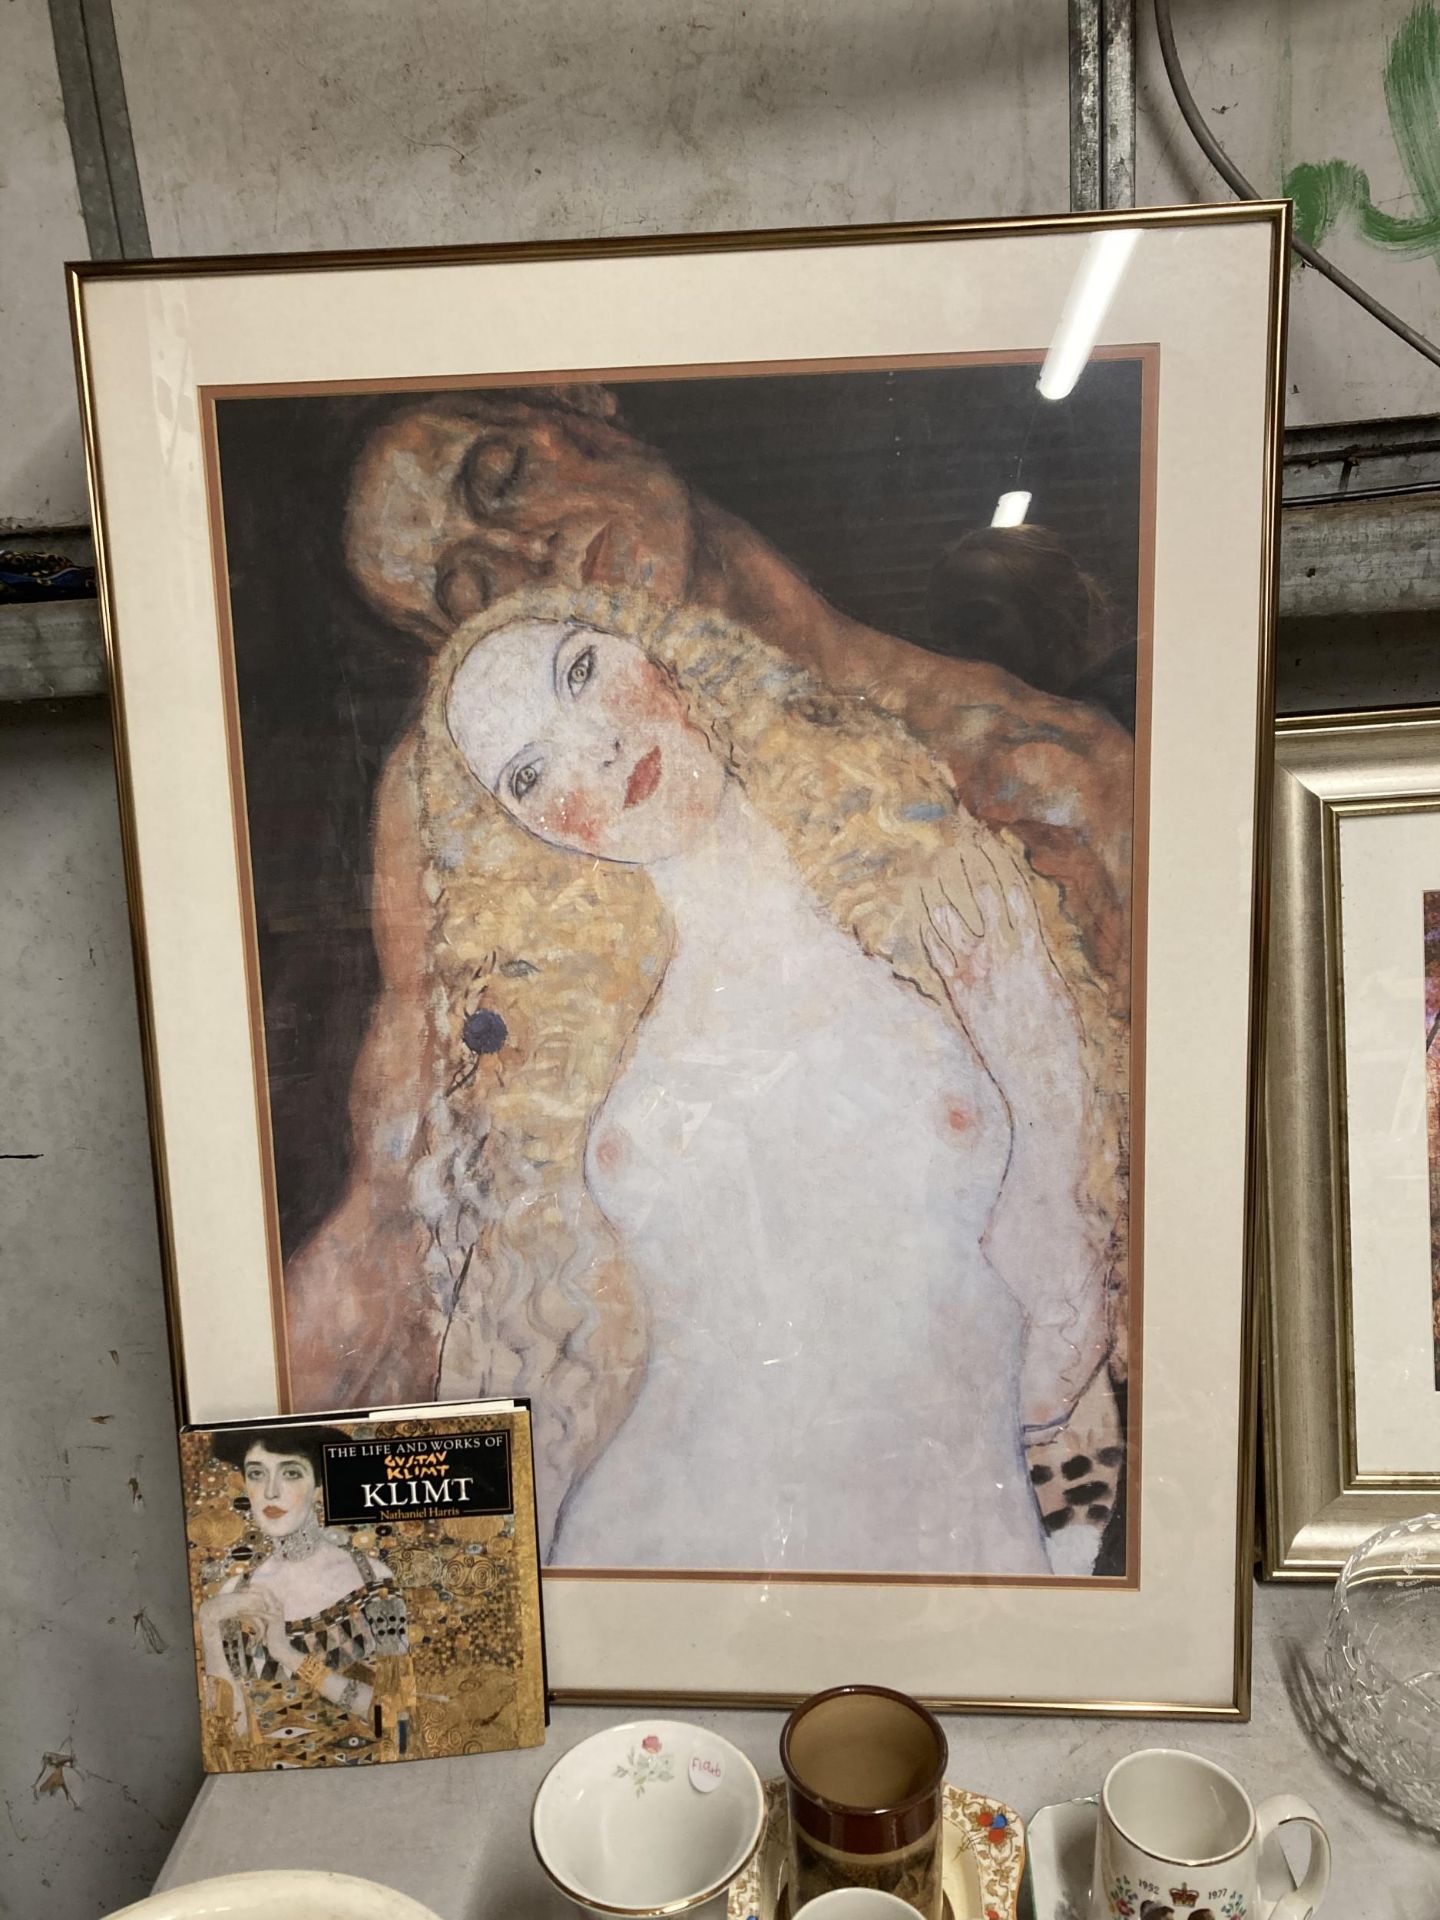 A FRAMED PRINT BY GUSTAV KLIMT TOGTHER WITH A BOOK DEPICTING HIS LIFE AND WORKS